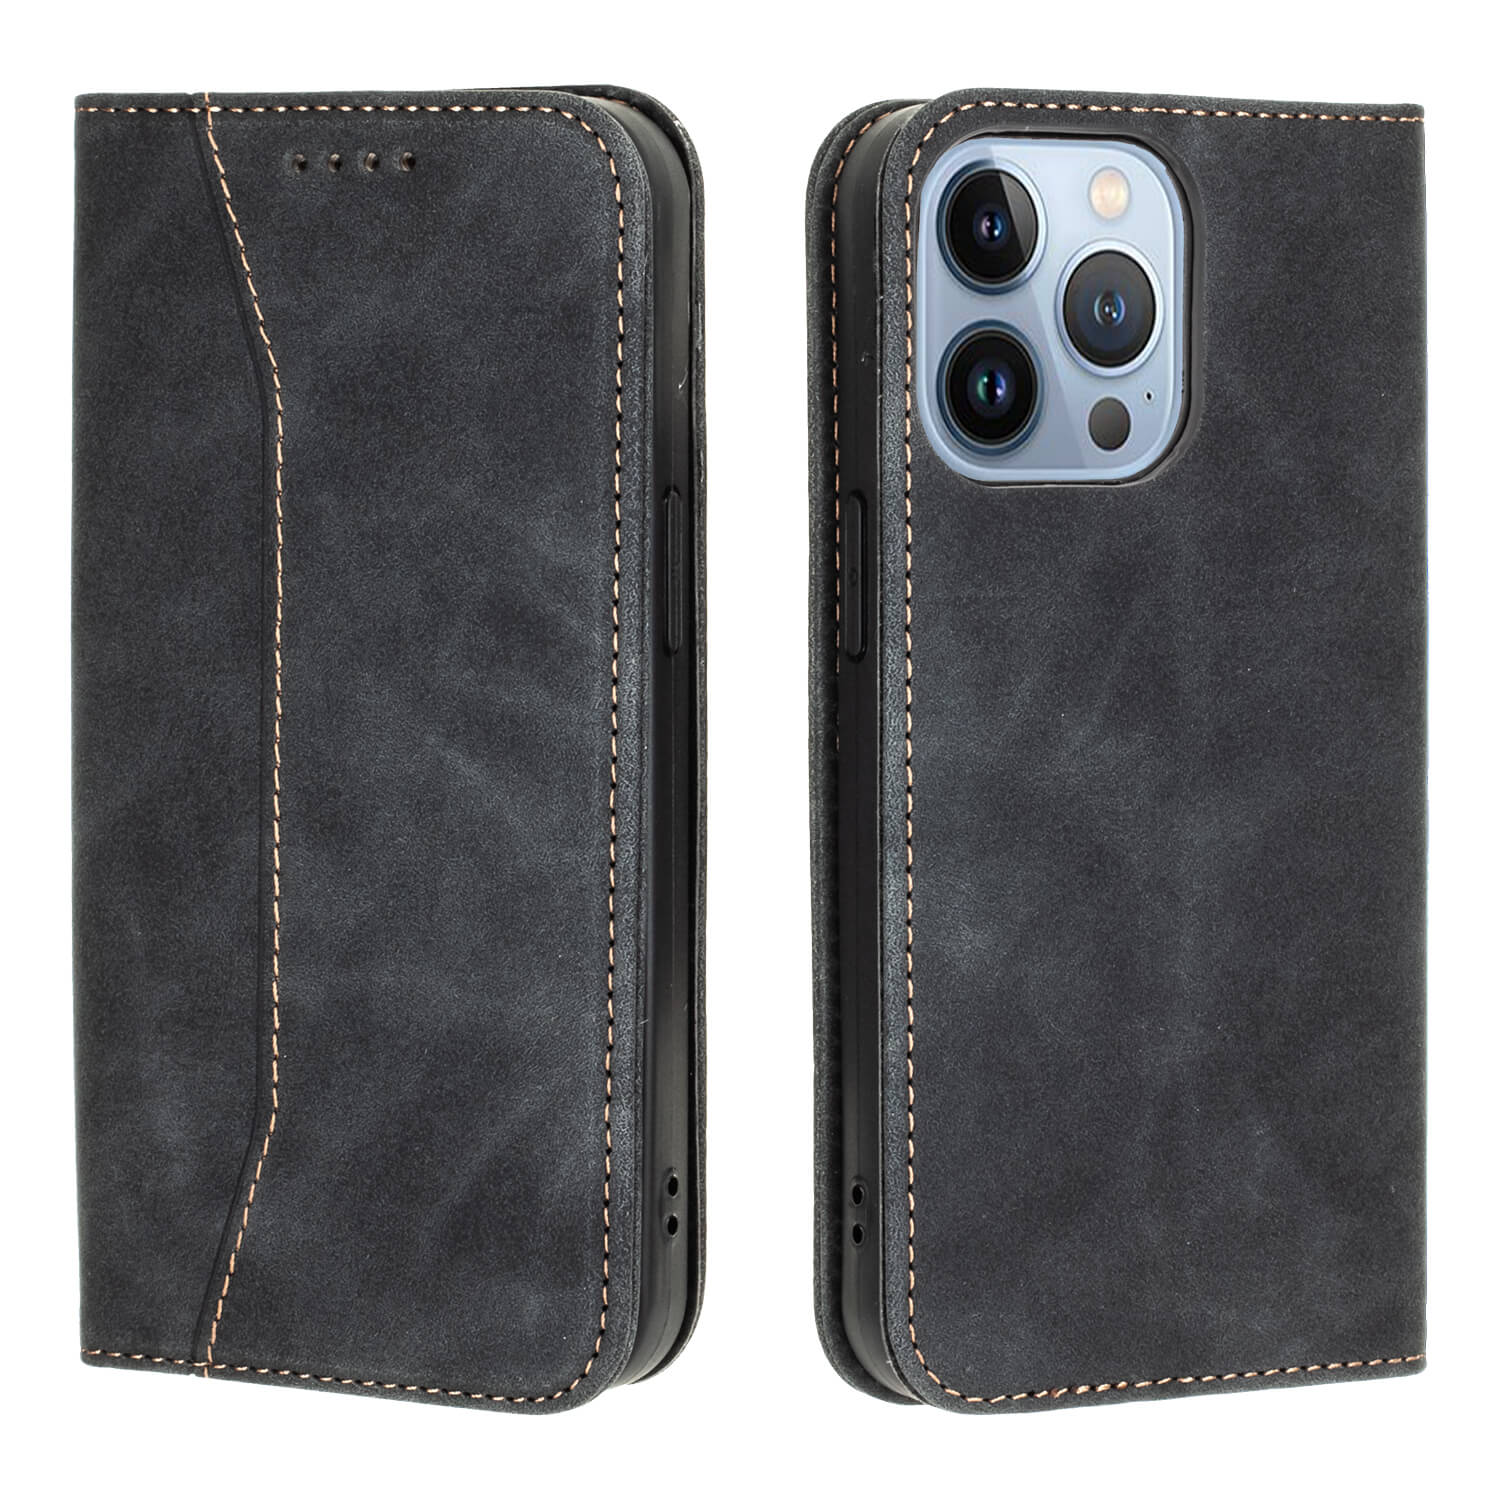 Bodycell Book Case Pu Leather For IPHONE 13 Pro 6.1" Black